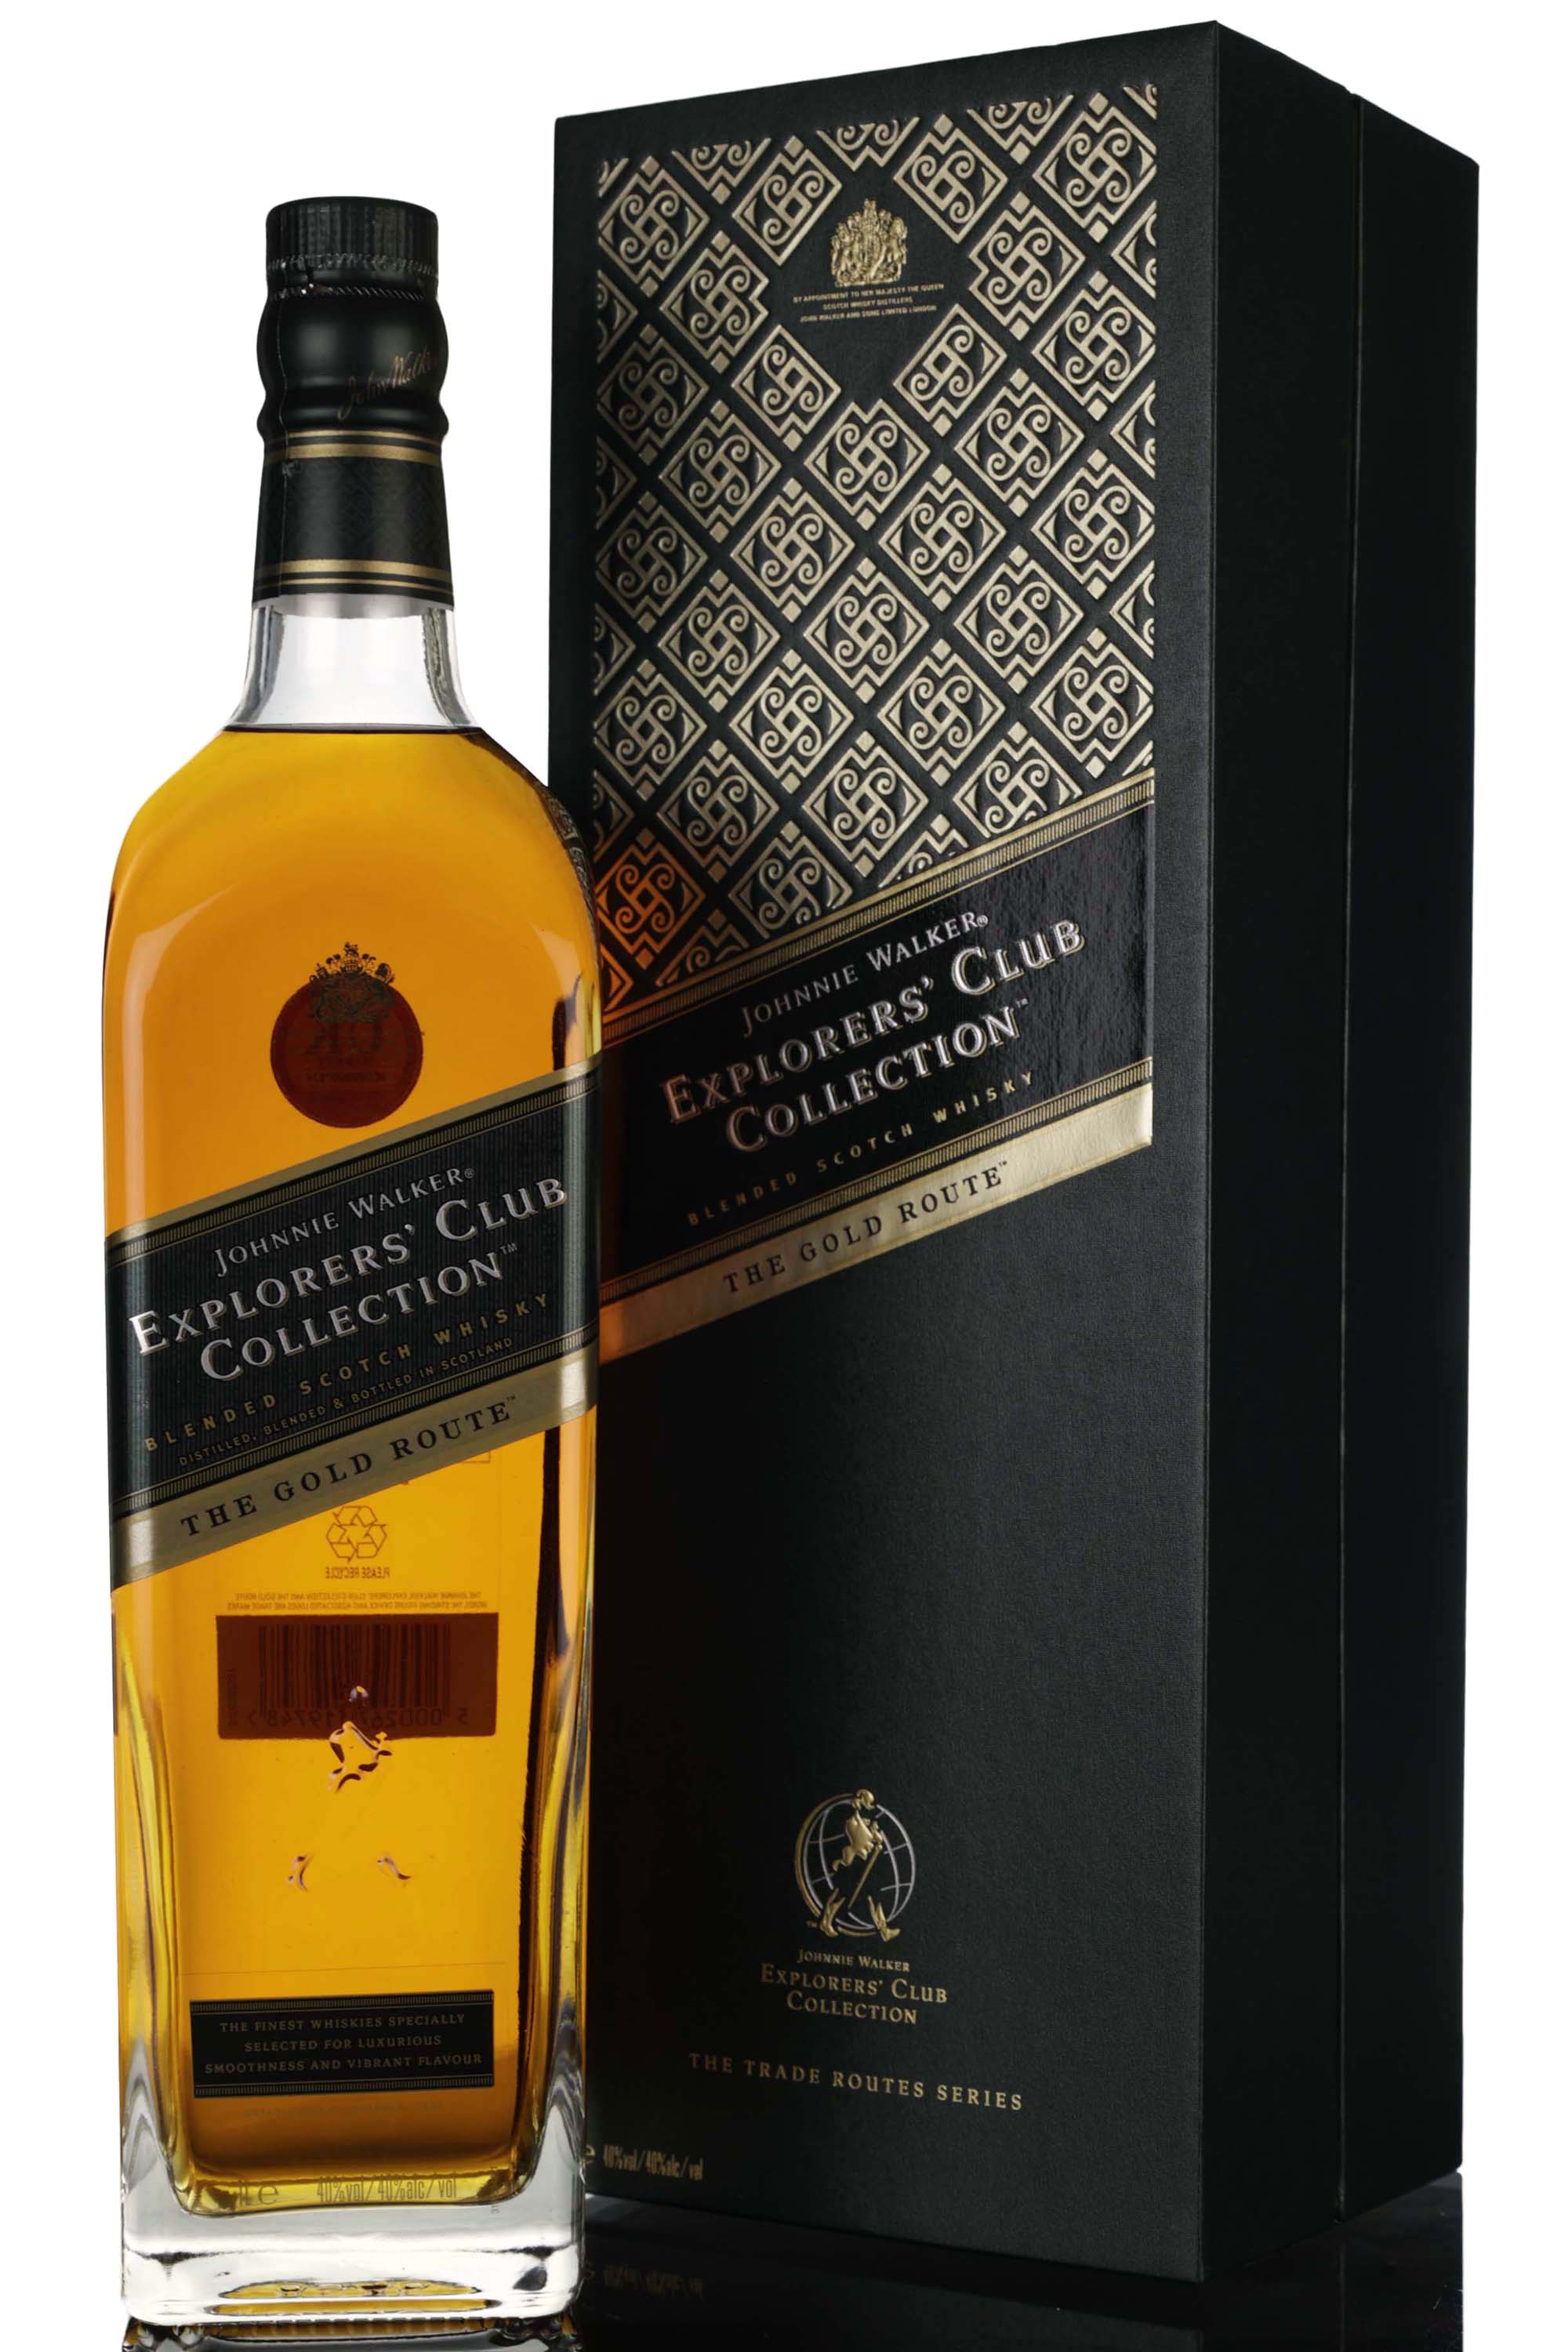 Johnnie Walker Explorers Club Collection - The Gold Route - 1 Litre